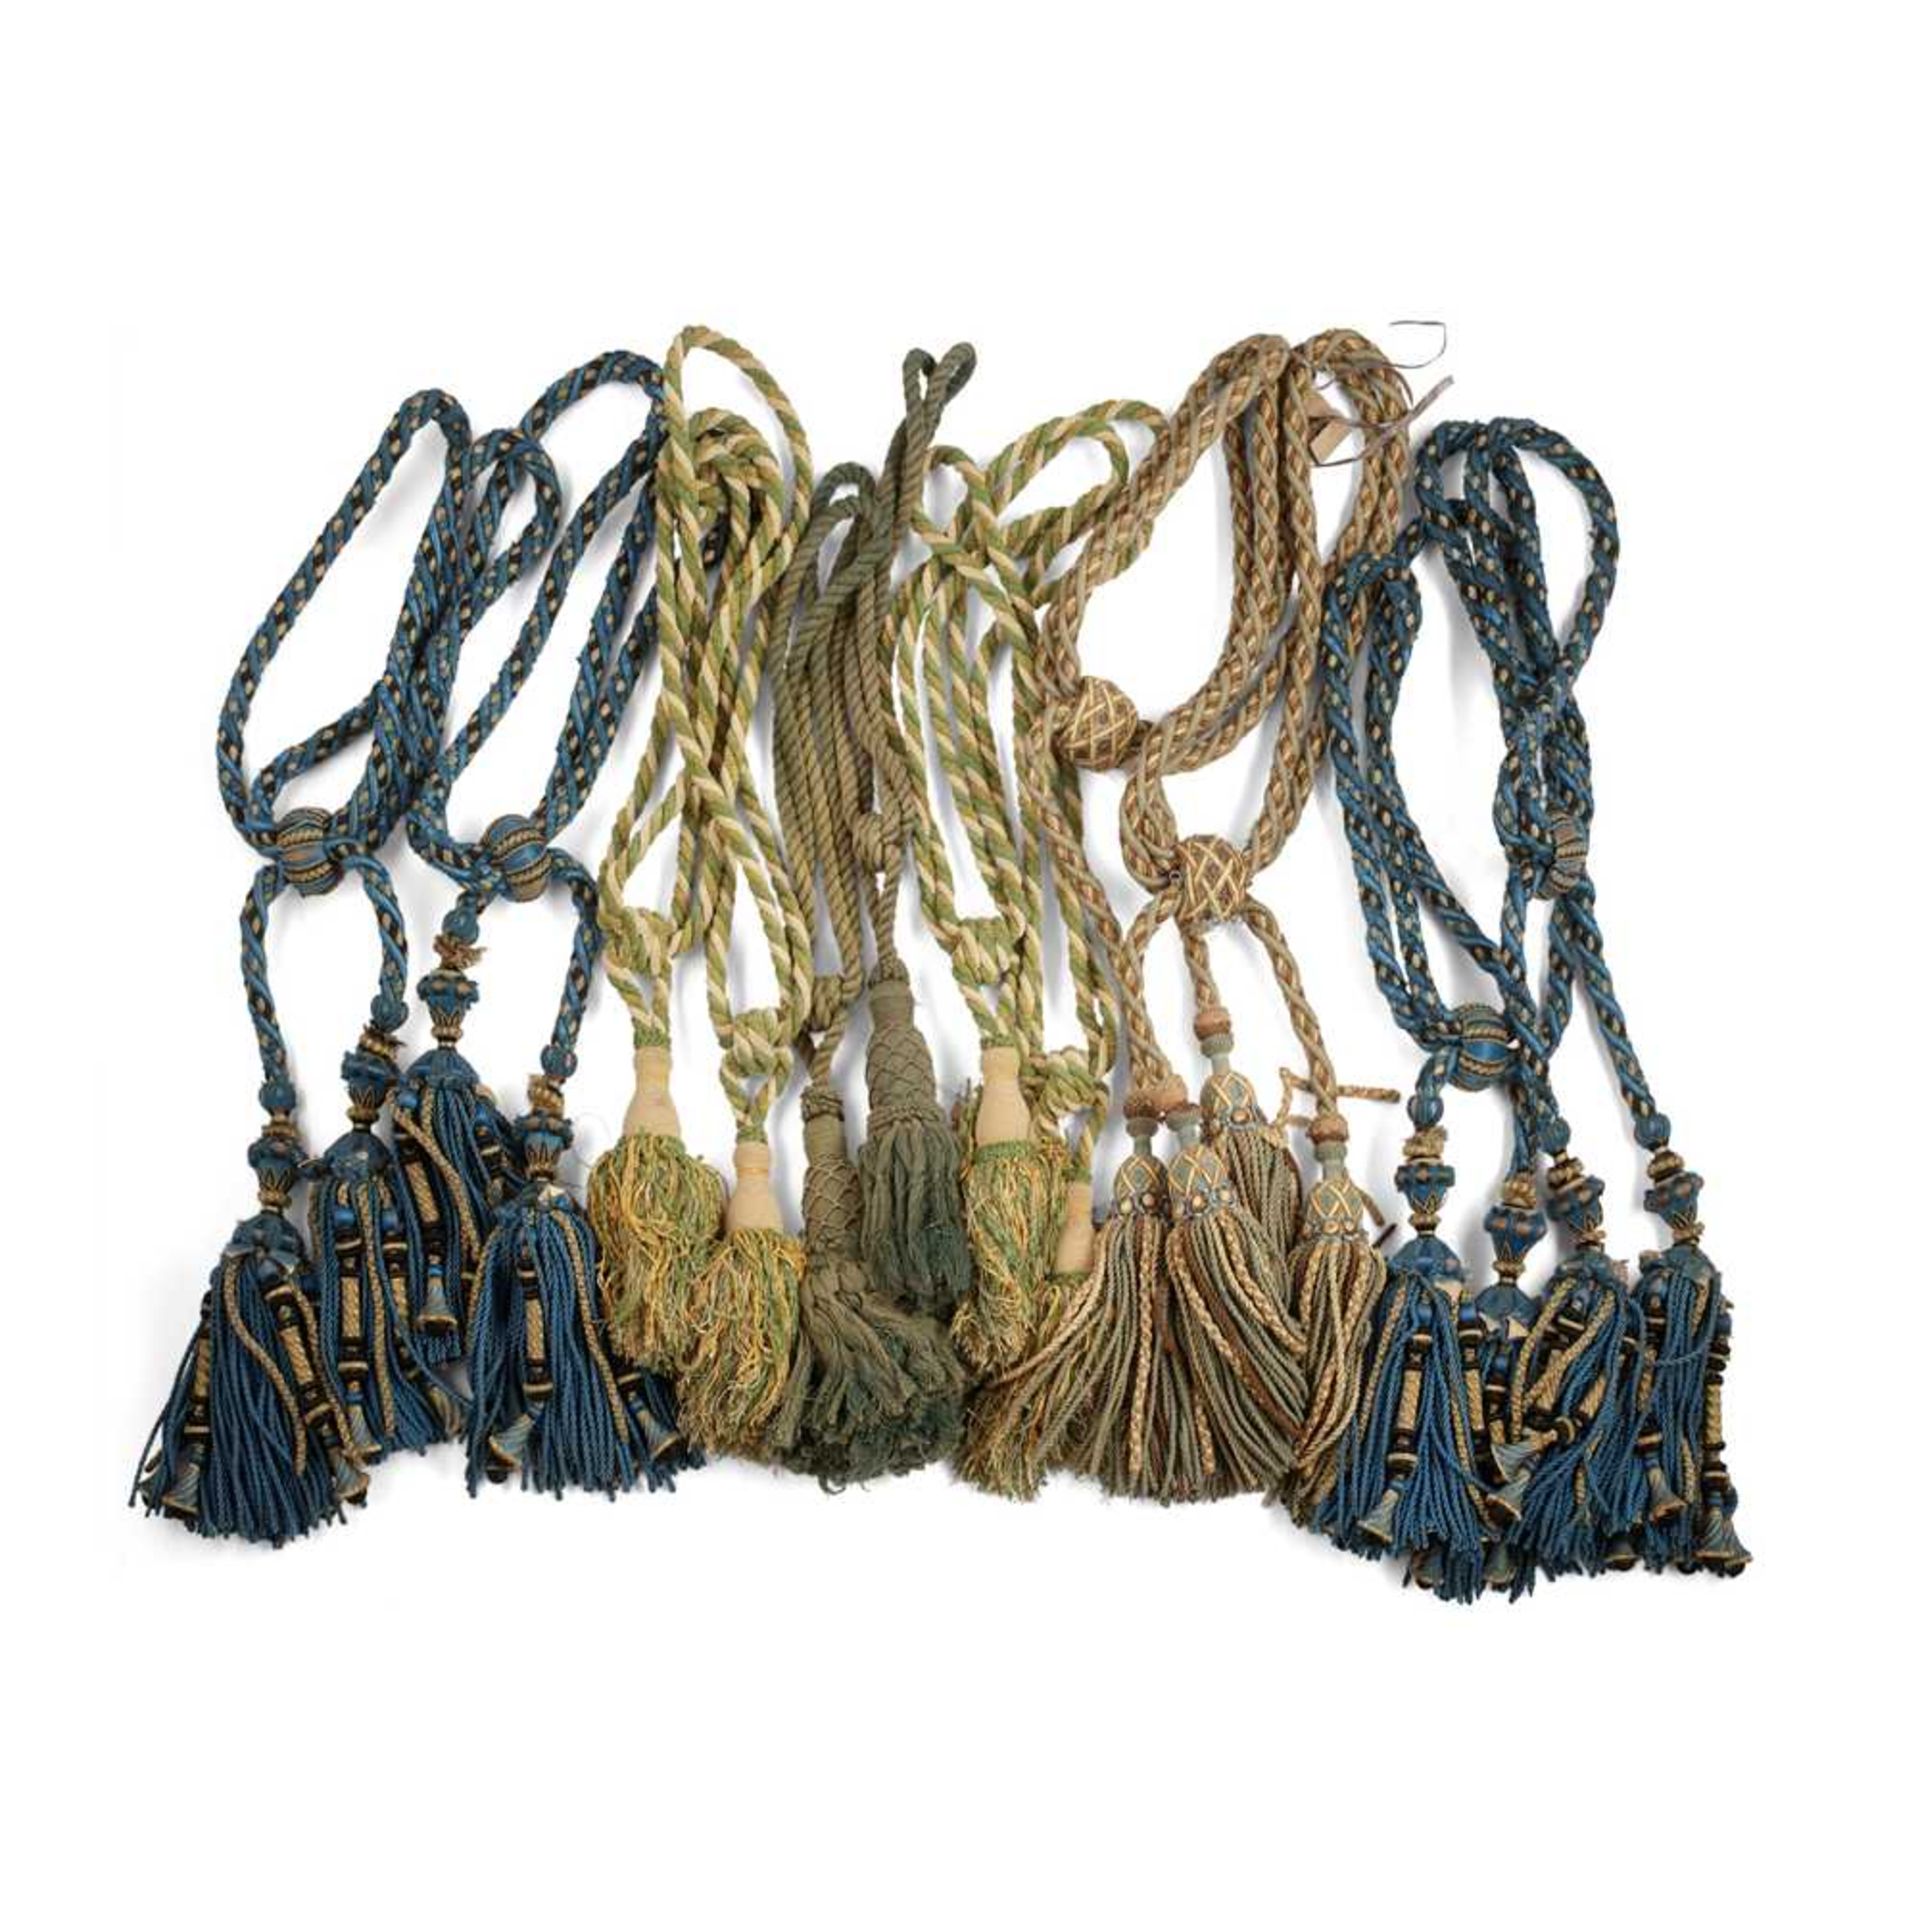 GROUP OF DRAPERY TIEBACKS AND TASSELS 19TH/ EARLY 20TH CENTURY